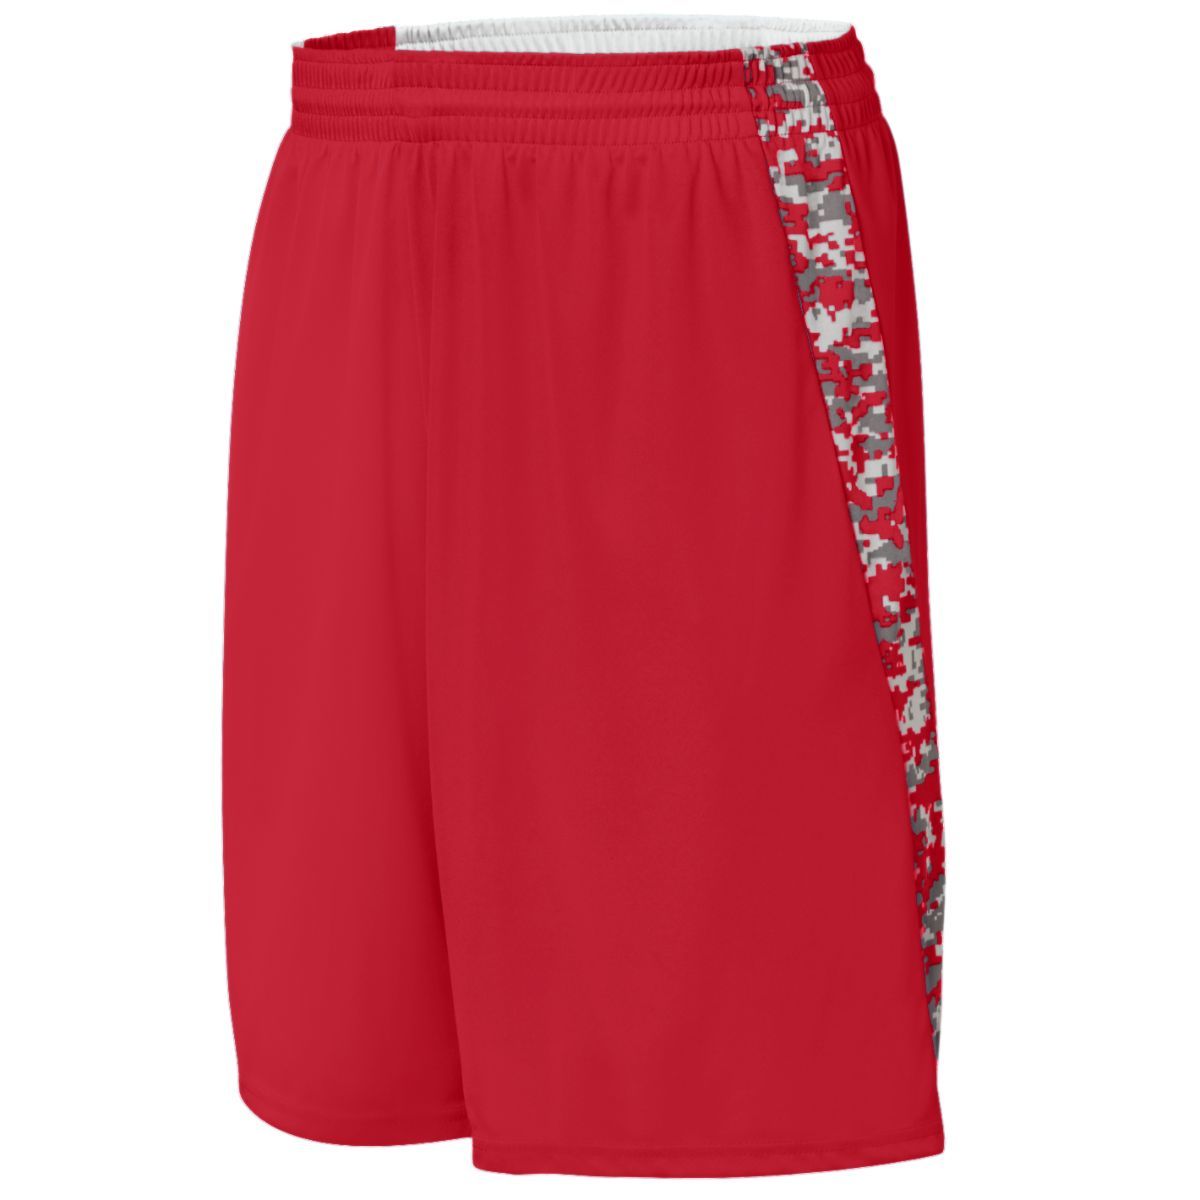 Augusta Sportswear Youth Hook Shot Reversible Shorts in Red/Red Digi  -Part of the Youth, Youth-Shorts, Augusta-Products, Basketball, All-Sports, All-Sports-1 product lines at KanaleyCreations.com